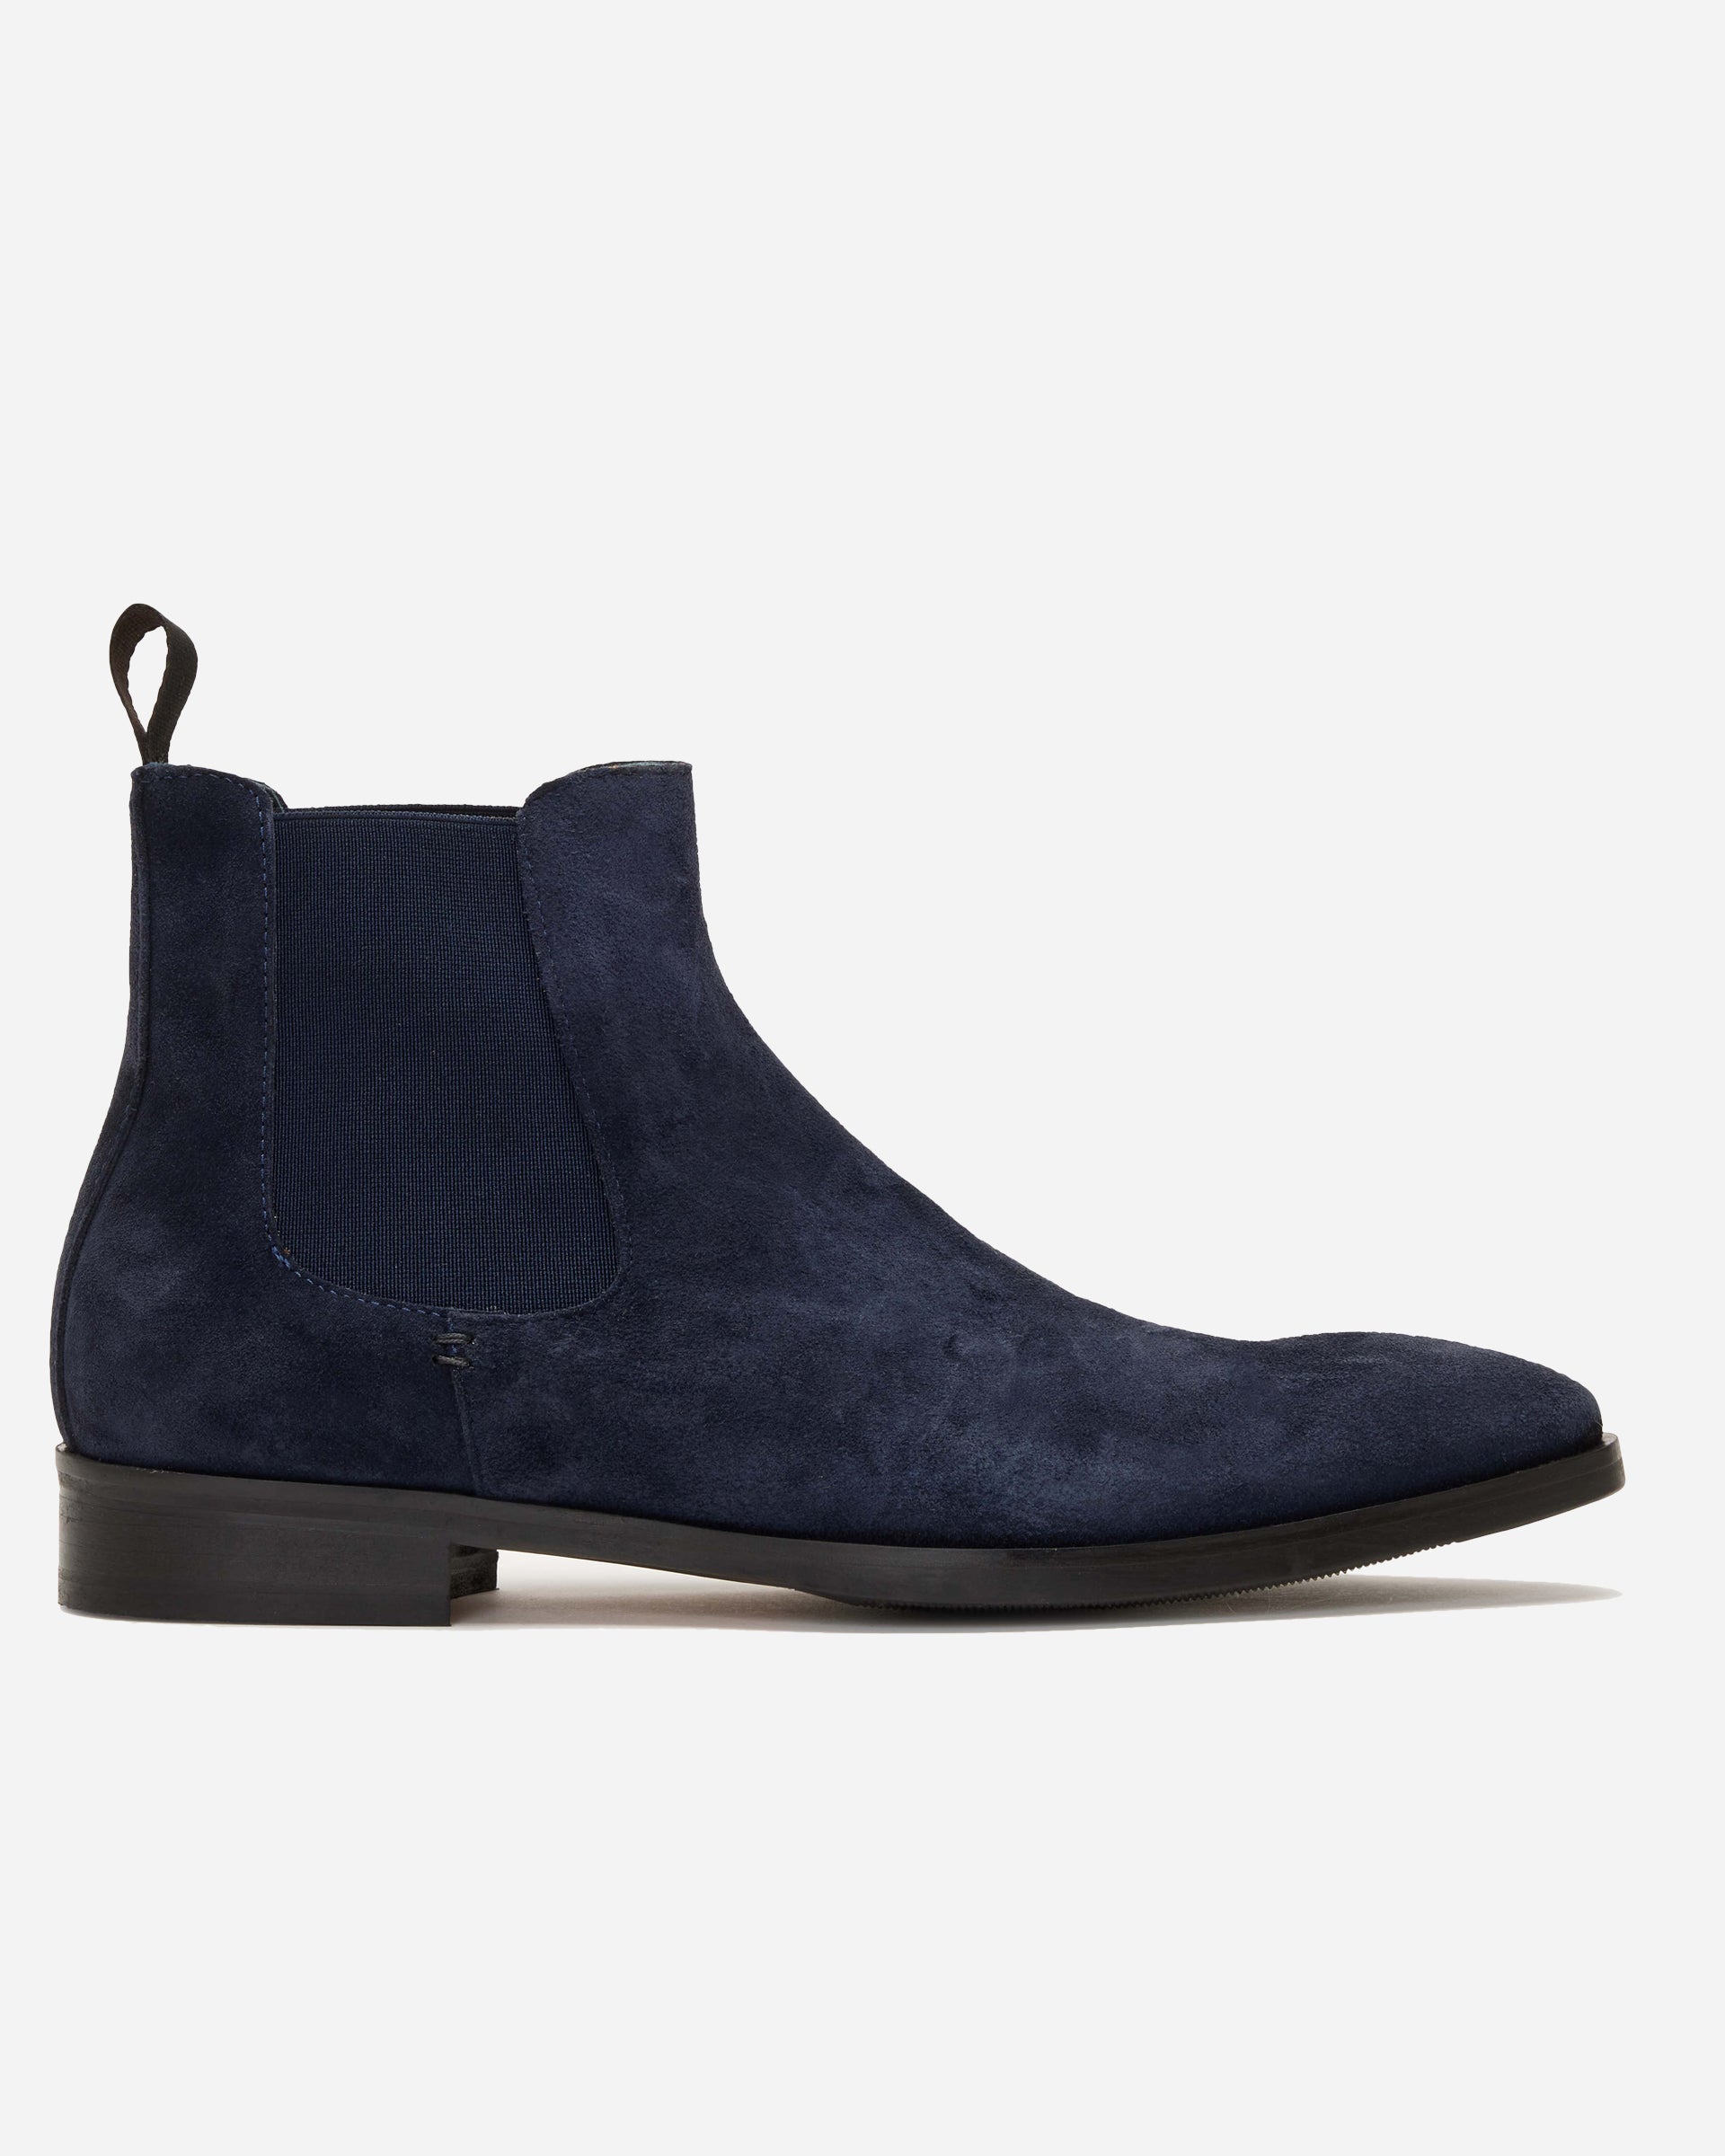 Navy Suede Chelsea Boot - Men's Shoes at Menzclub